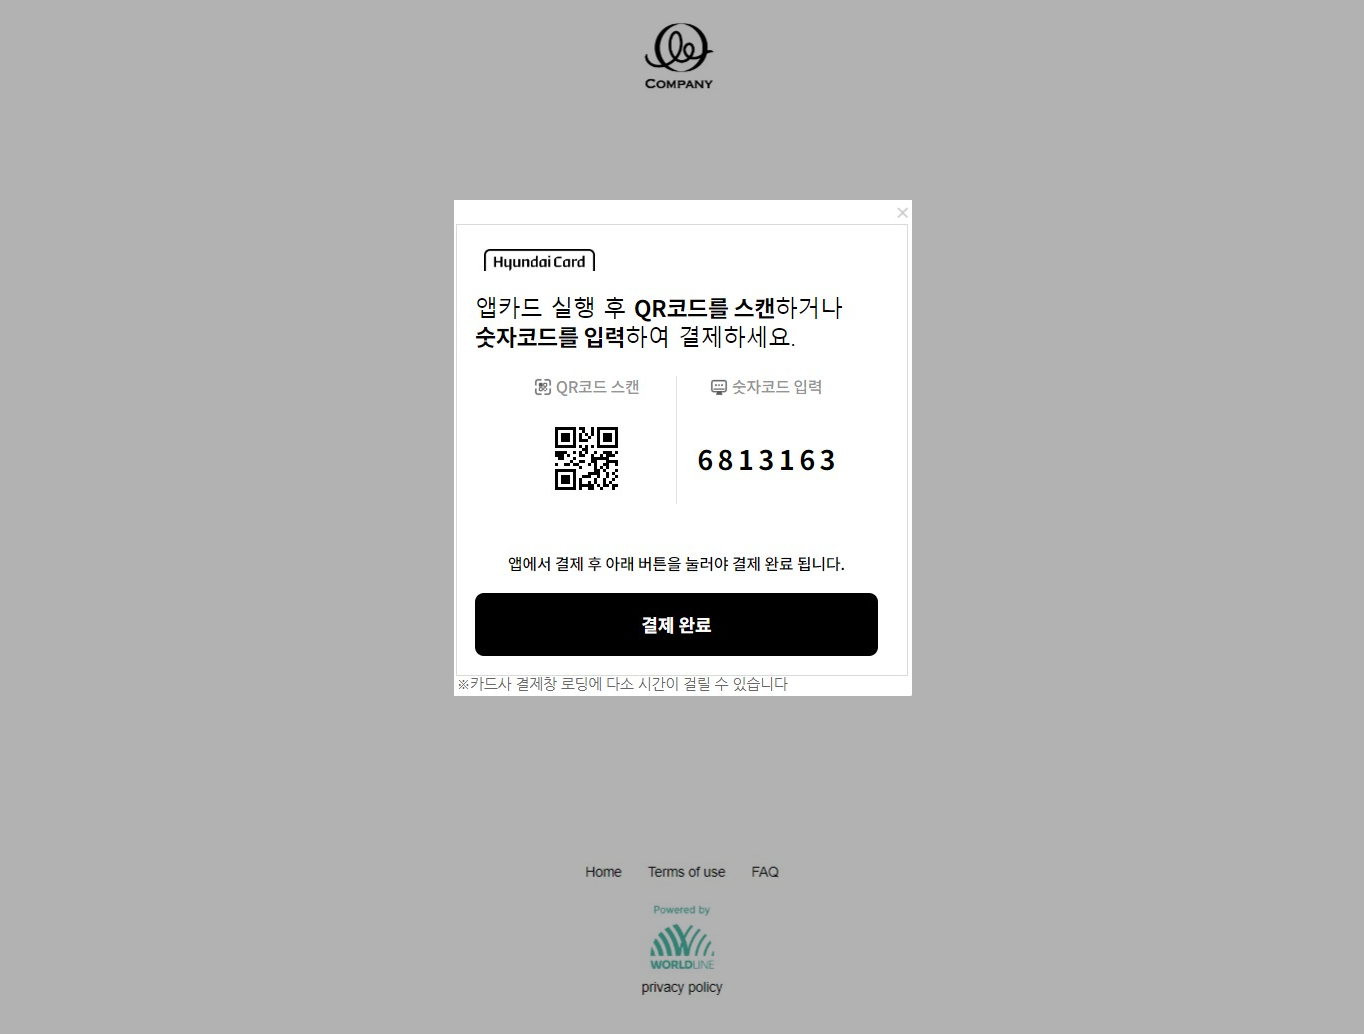 hyundai-card-authenticated-consumer-experience-desktop-flow-with-installments-04